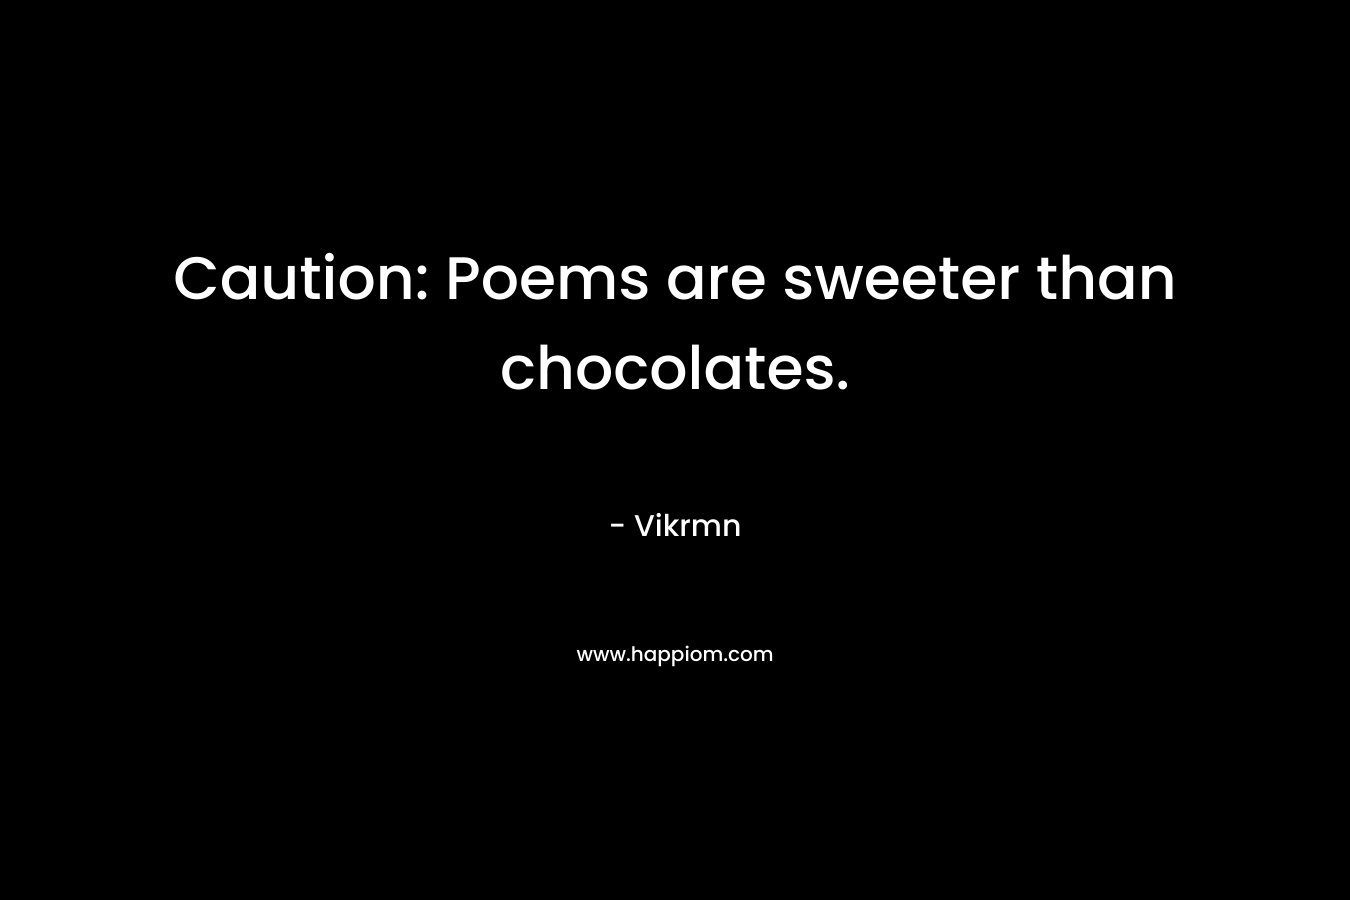 Caution: Poems are sweeter than chocolates. – Vikrmn